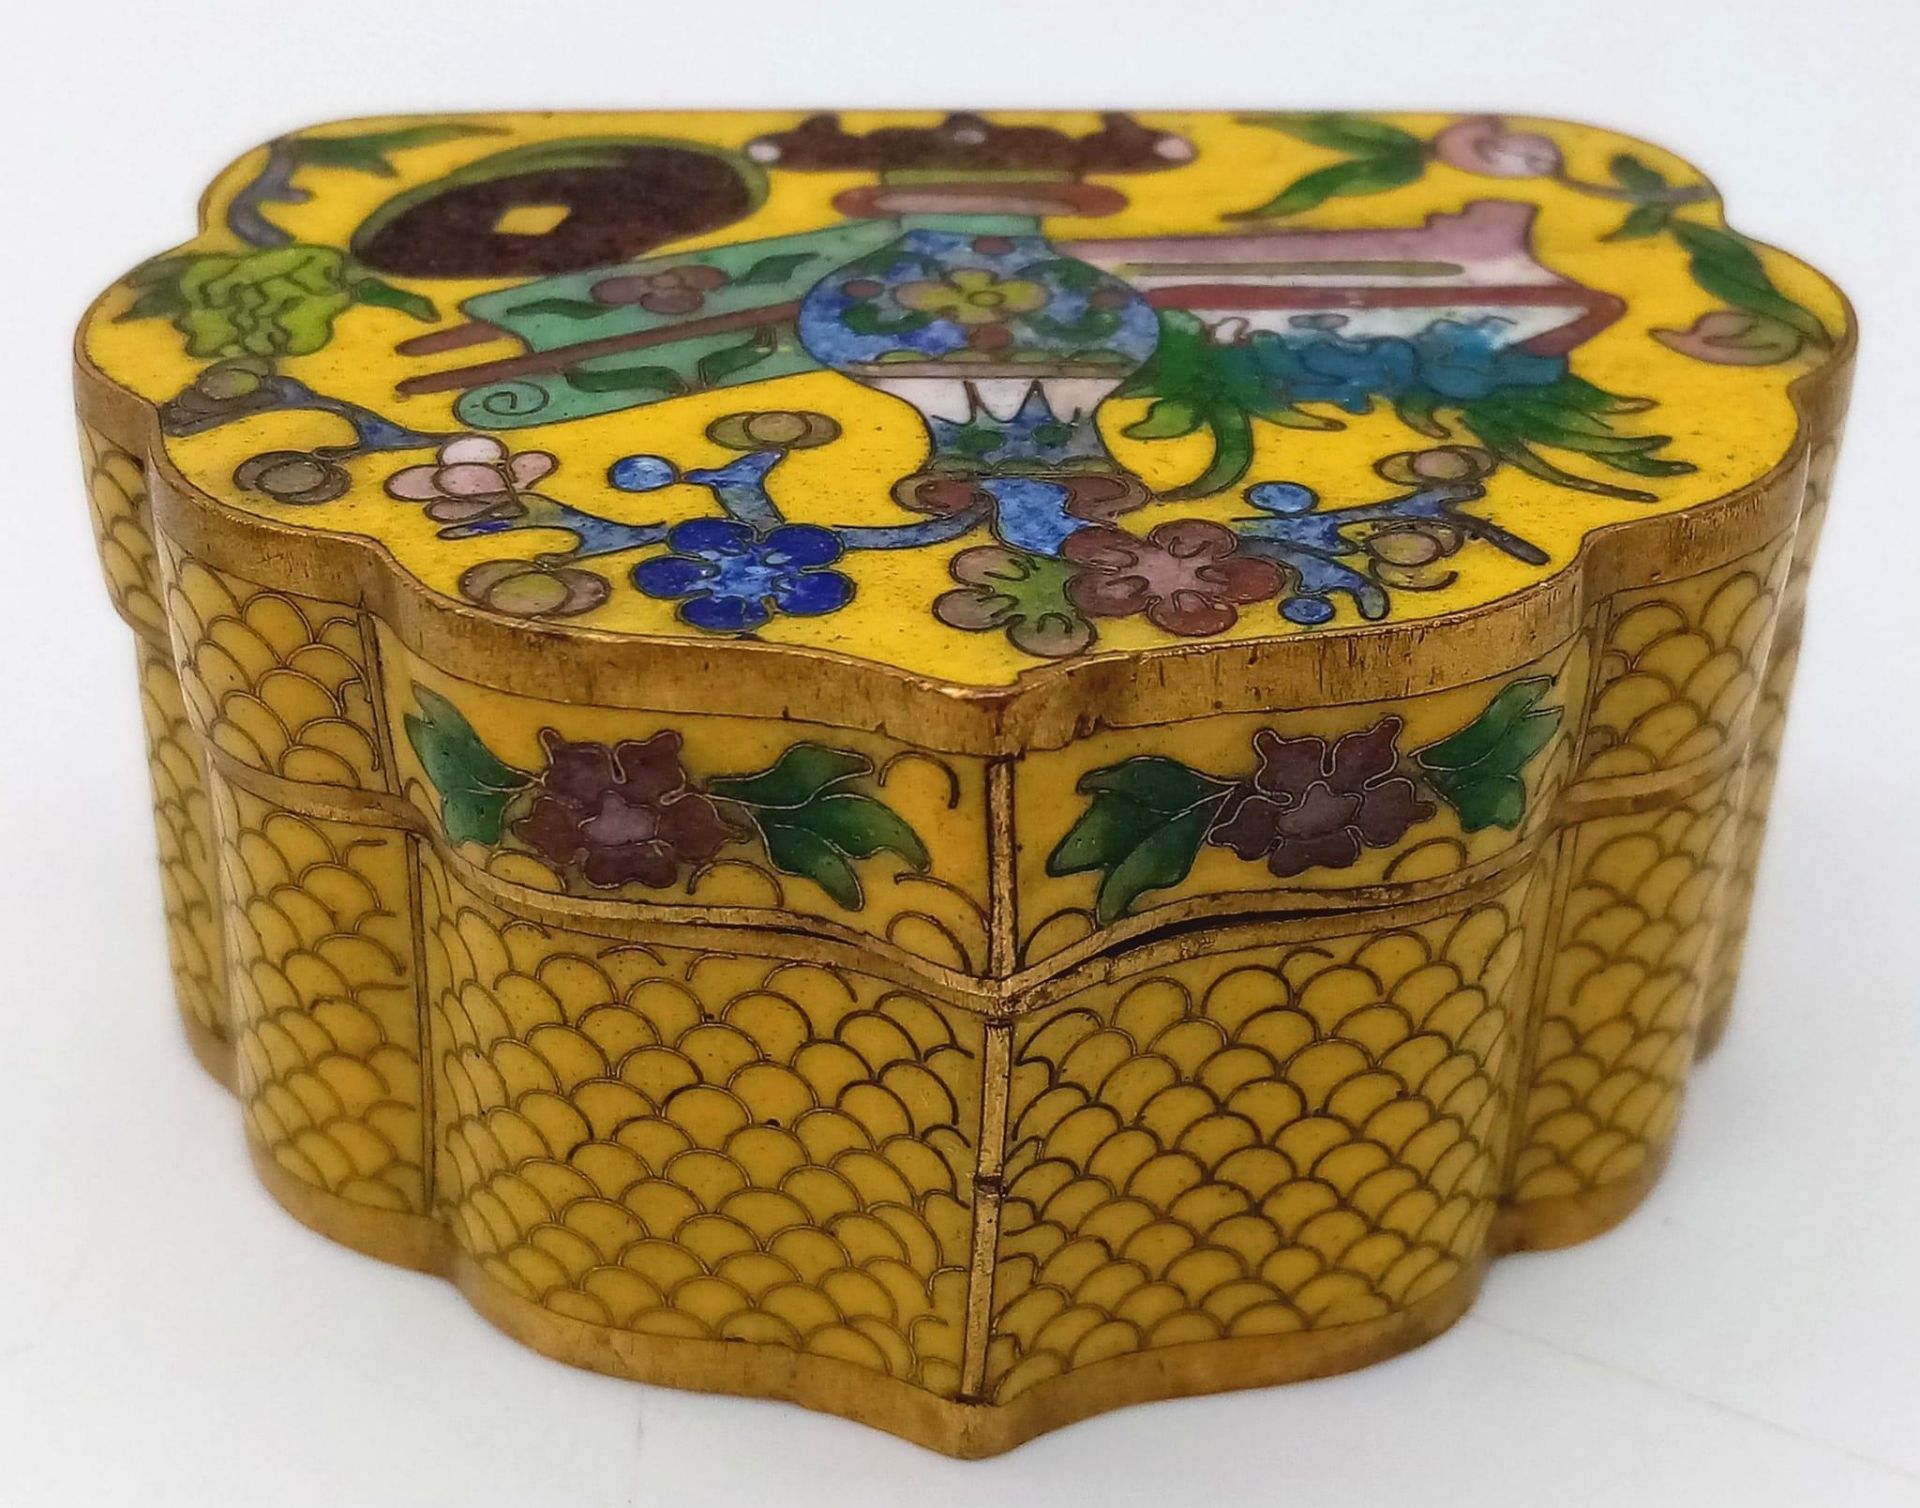 AN EXQUISITE EXAMPLE OF 19TH CENTURY CHINESE CLOISONNE WORK IN THE FORM OF A SMALL TRINKET BOX . - Image 2 of 5